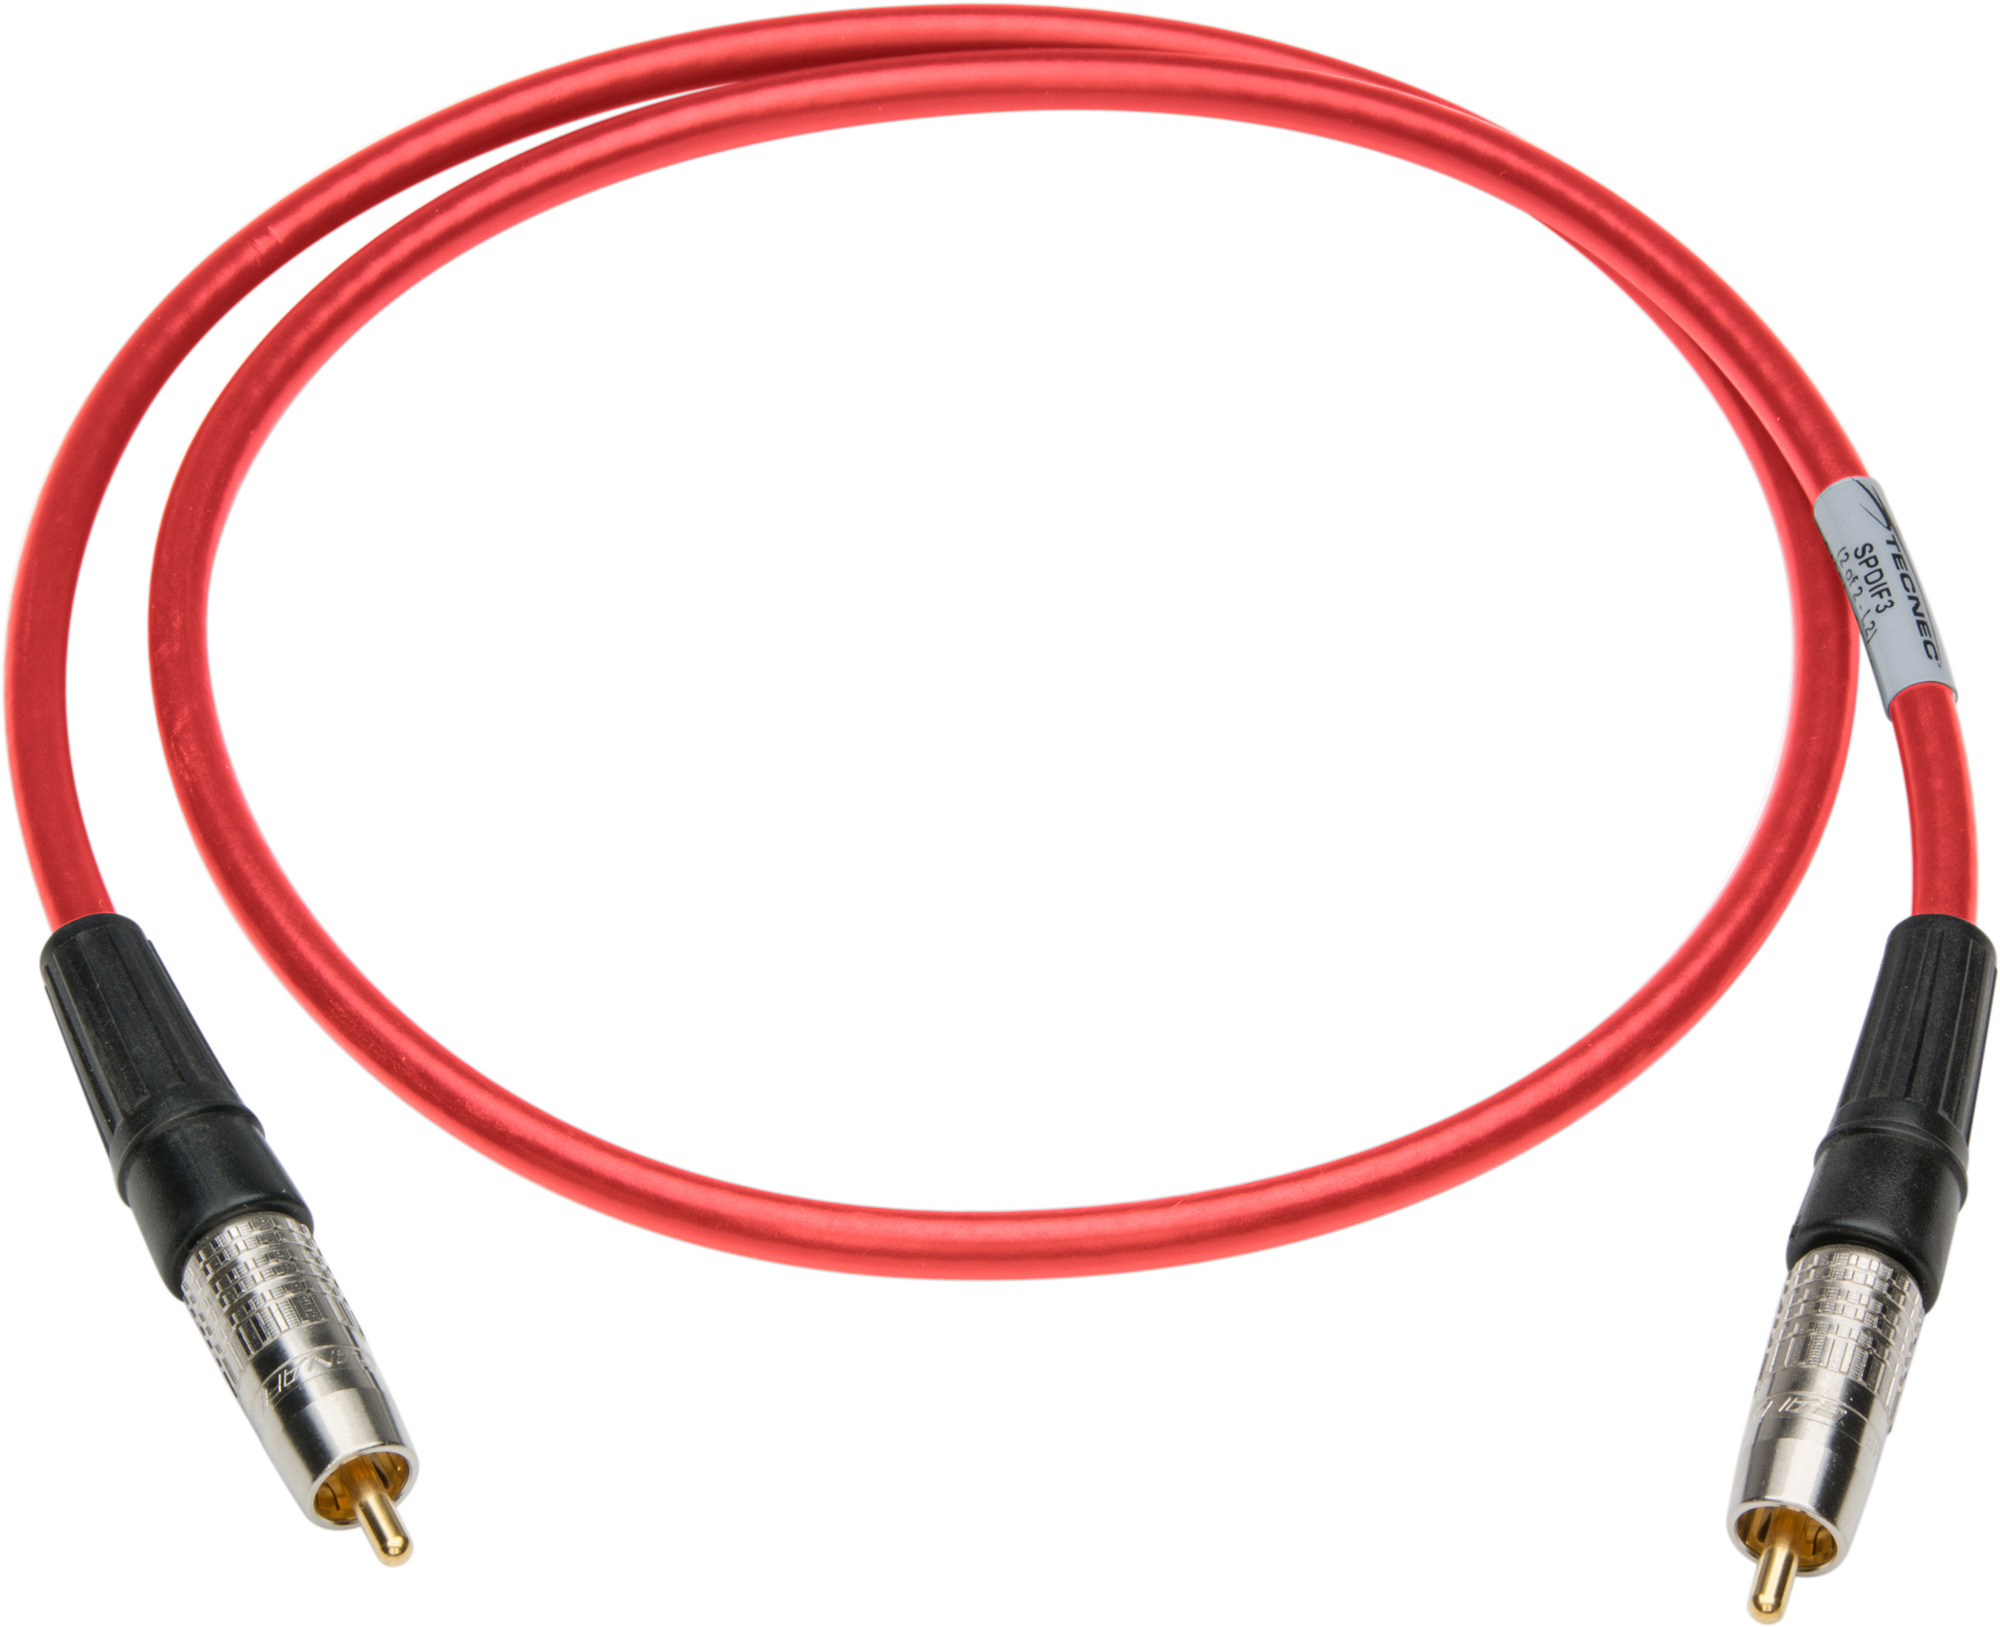 40 Foot SPDIF RCA Male to Male Digital Audio Cable - RED SPDIF40RD